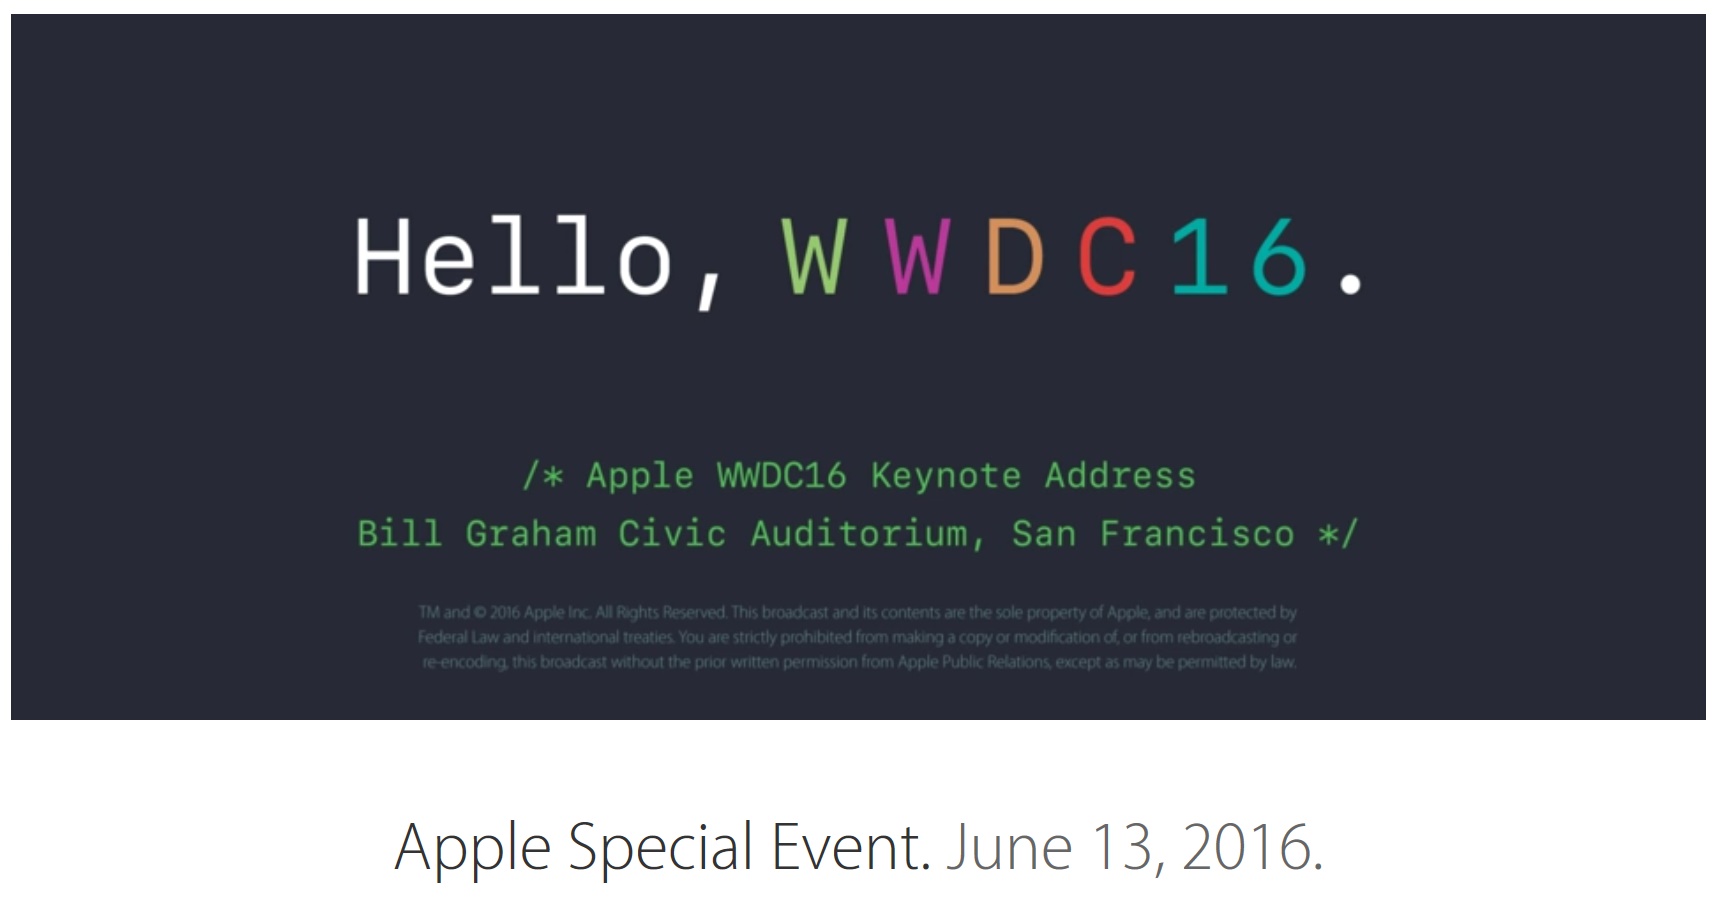 Apple Worldwide Developers Conference 2016